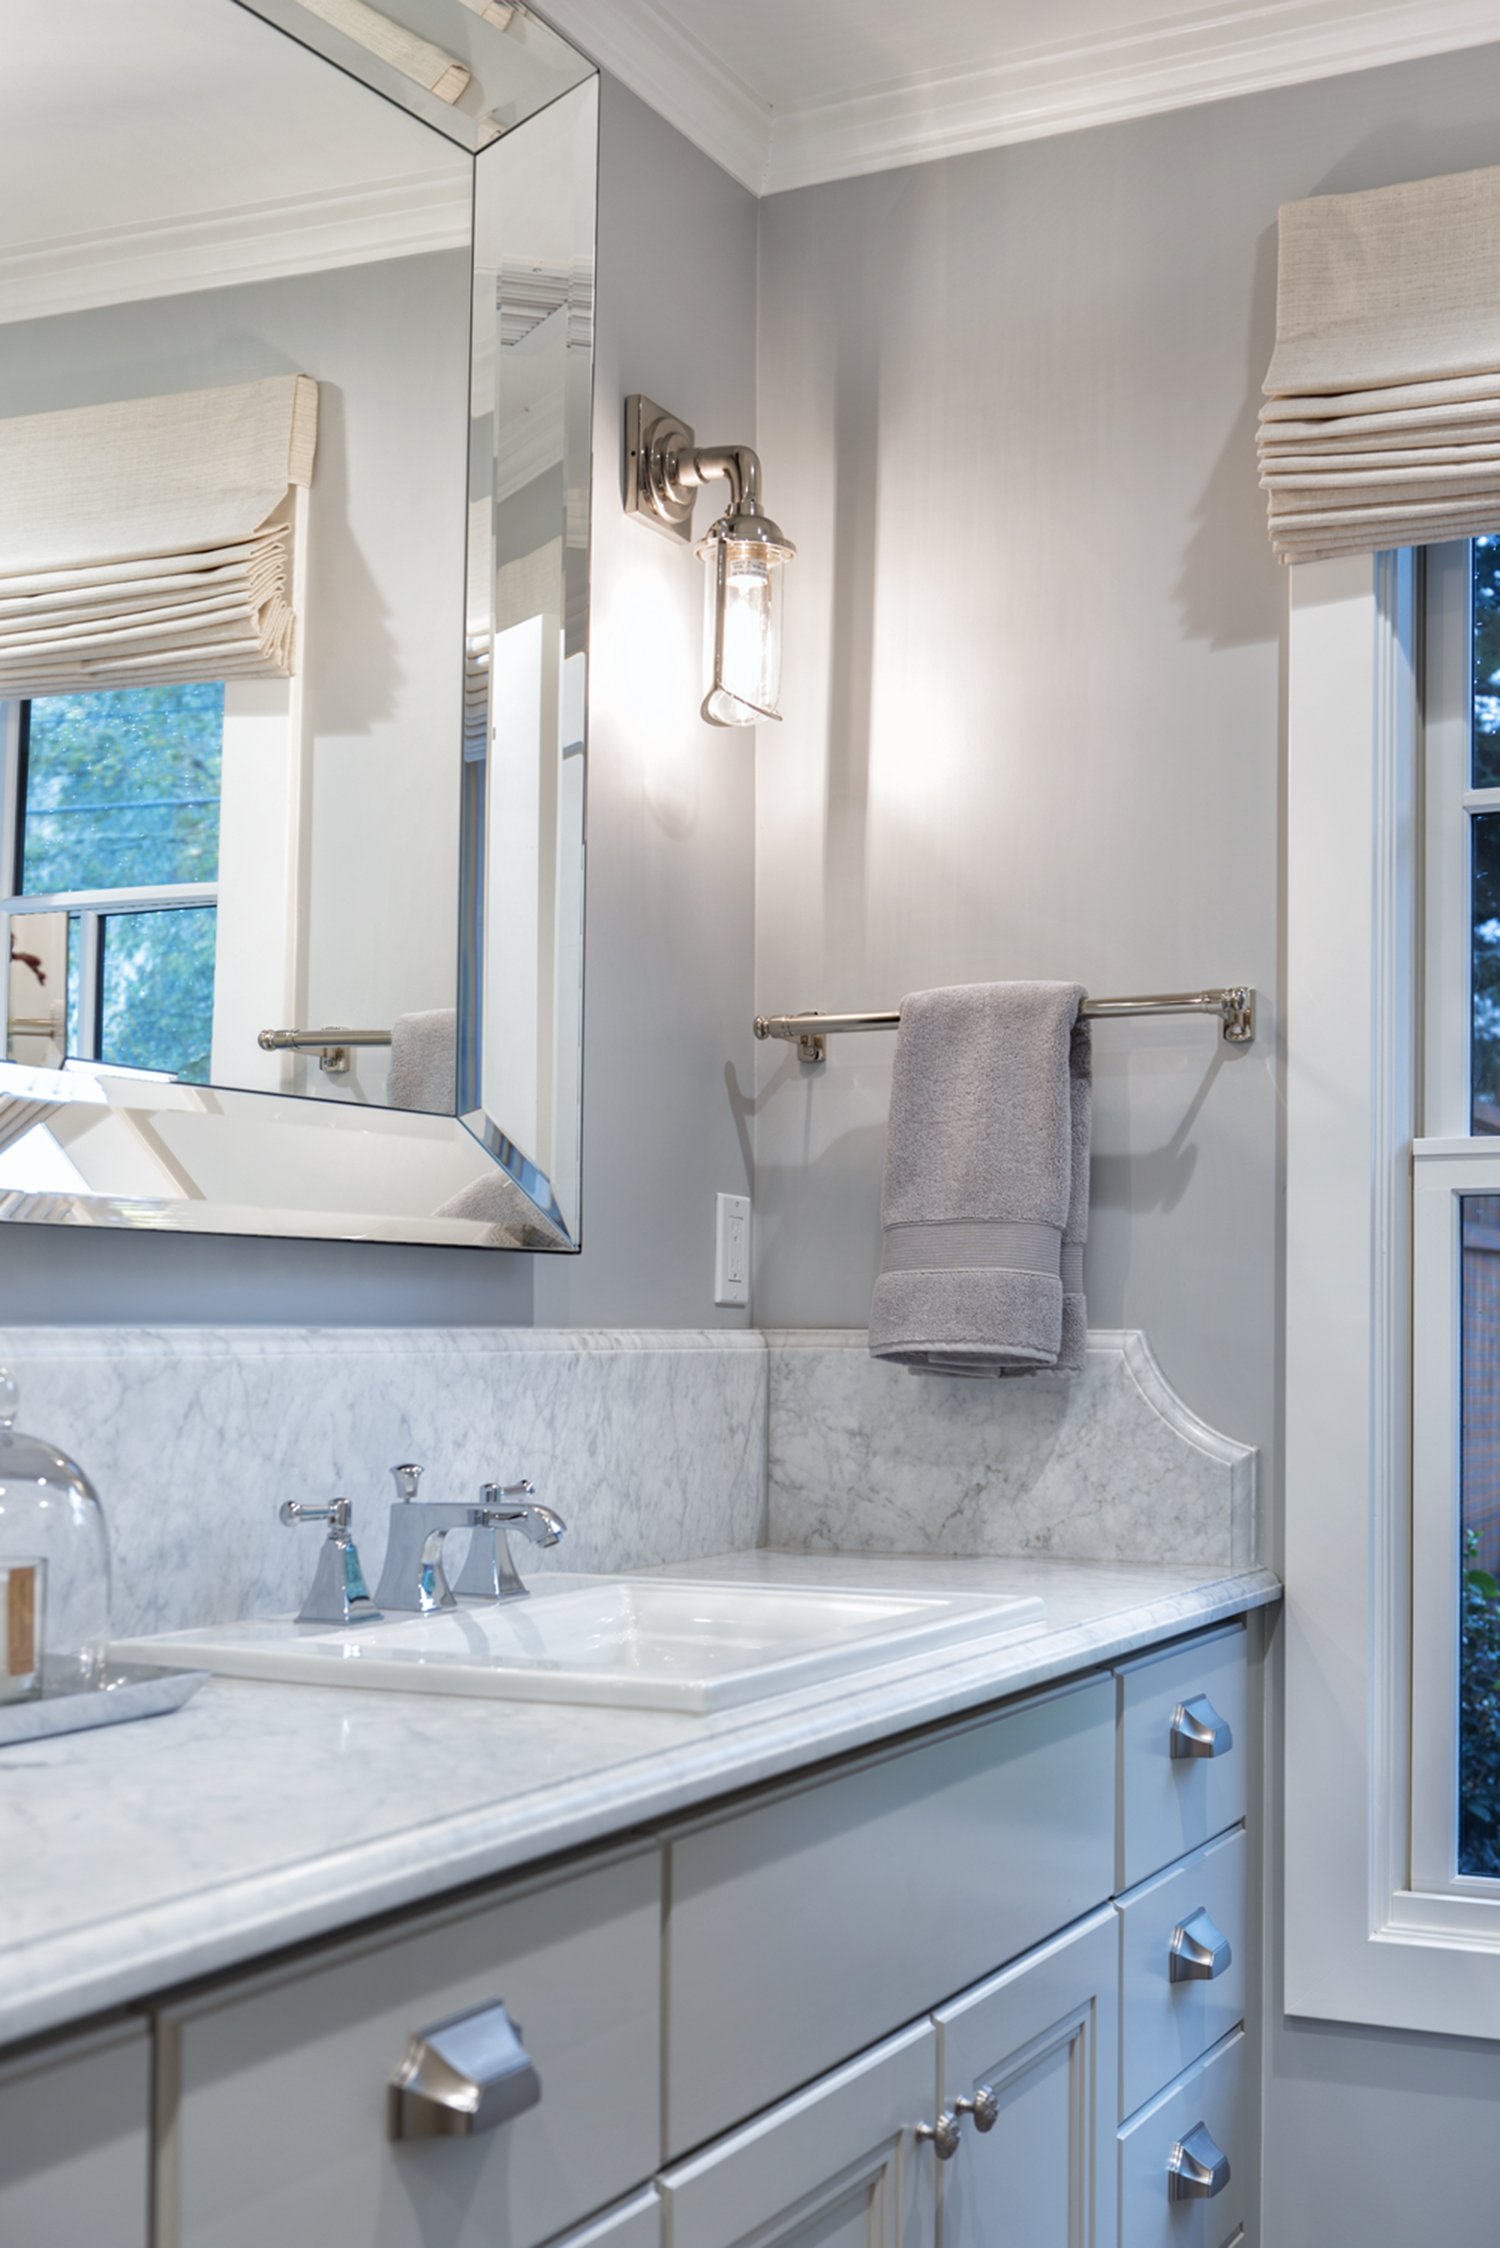  A bathroom vanity with marble countertops.  